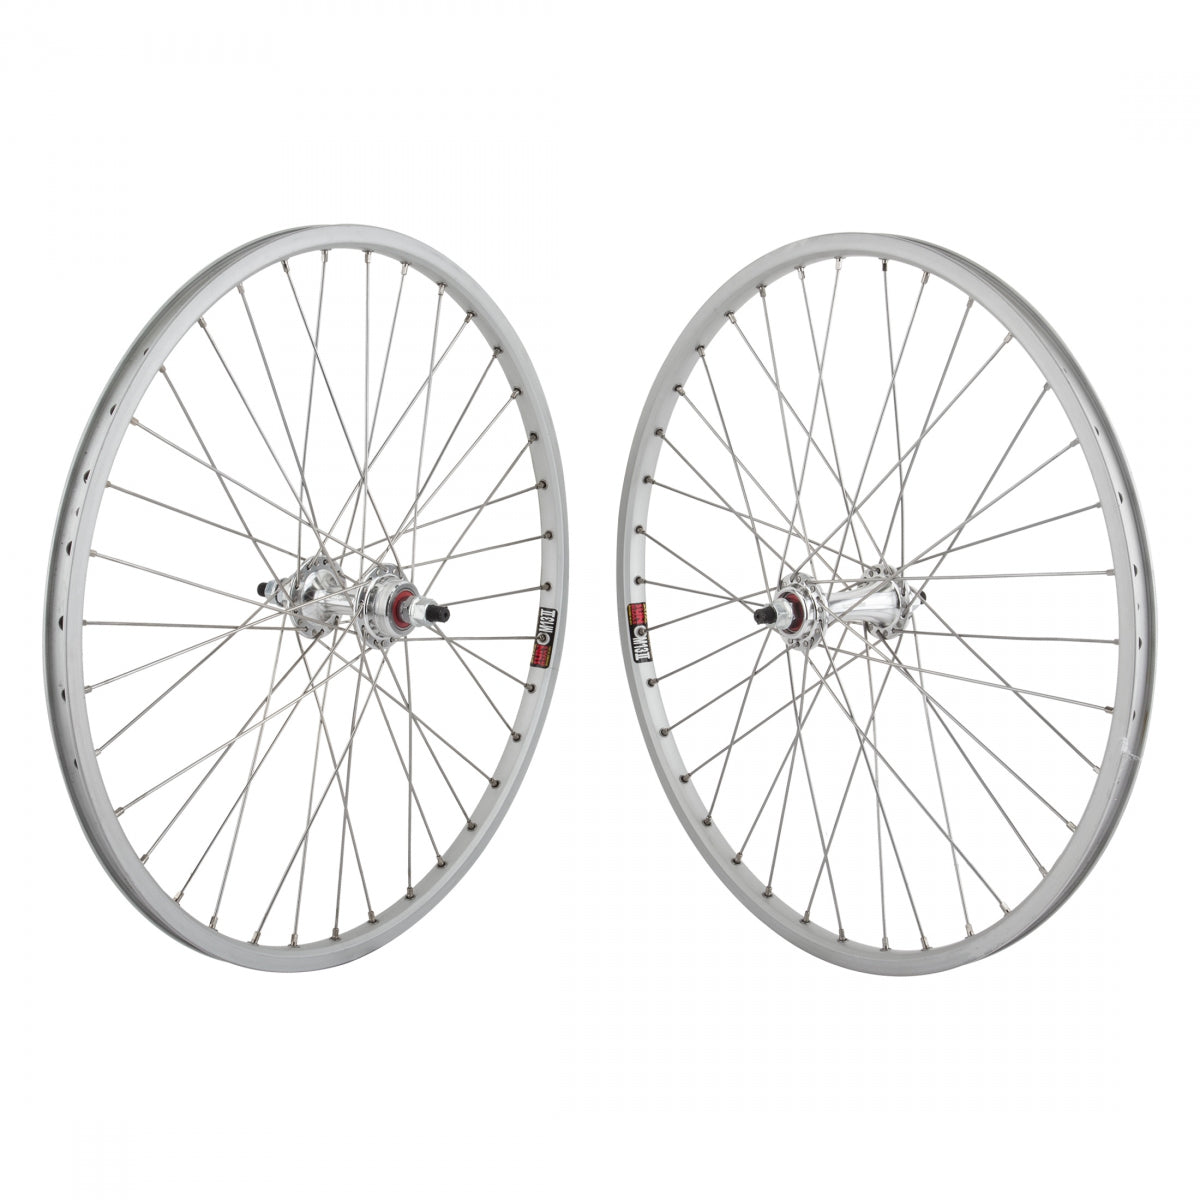 WheelMaster Front And Rear Bicycle Wheel Set, 20 x 1-1/8 36H, Sun M13-II, Bolt On, Silver